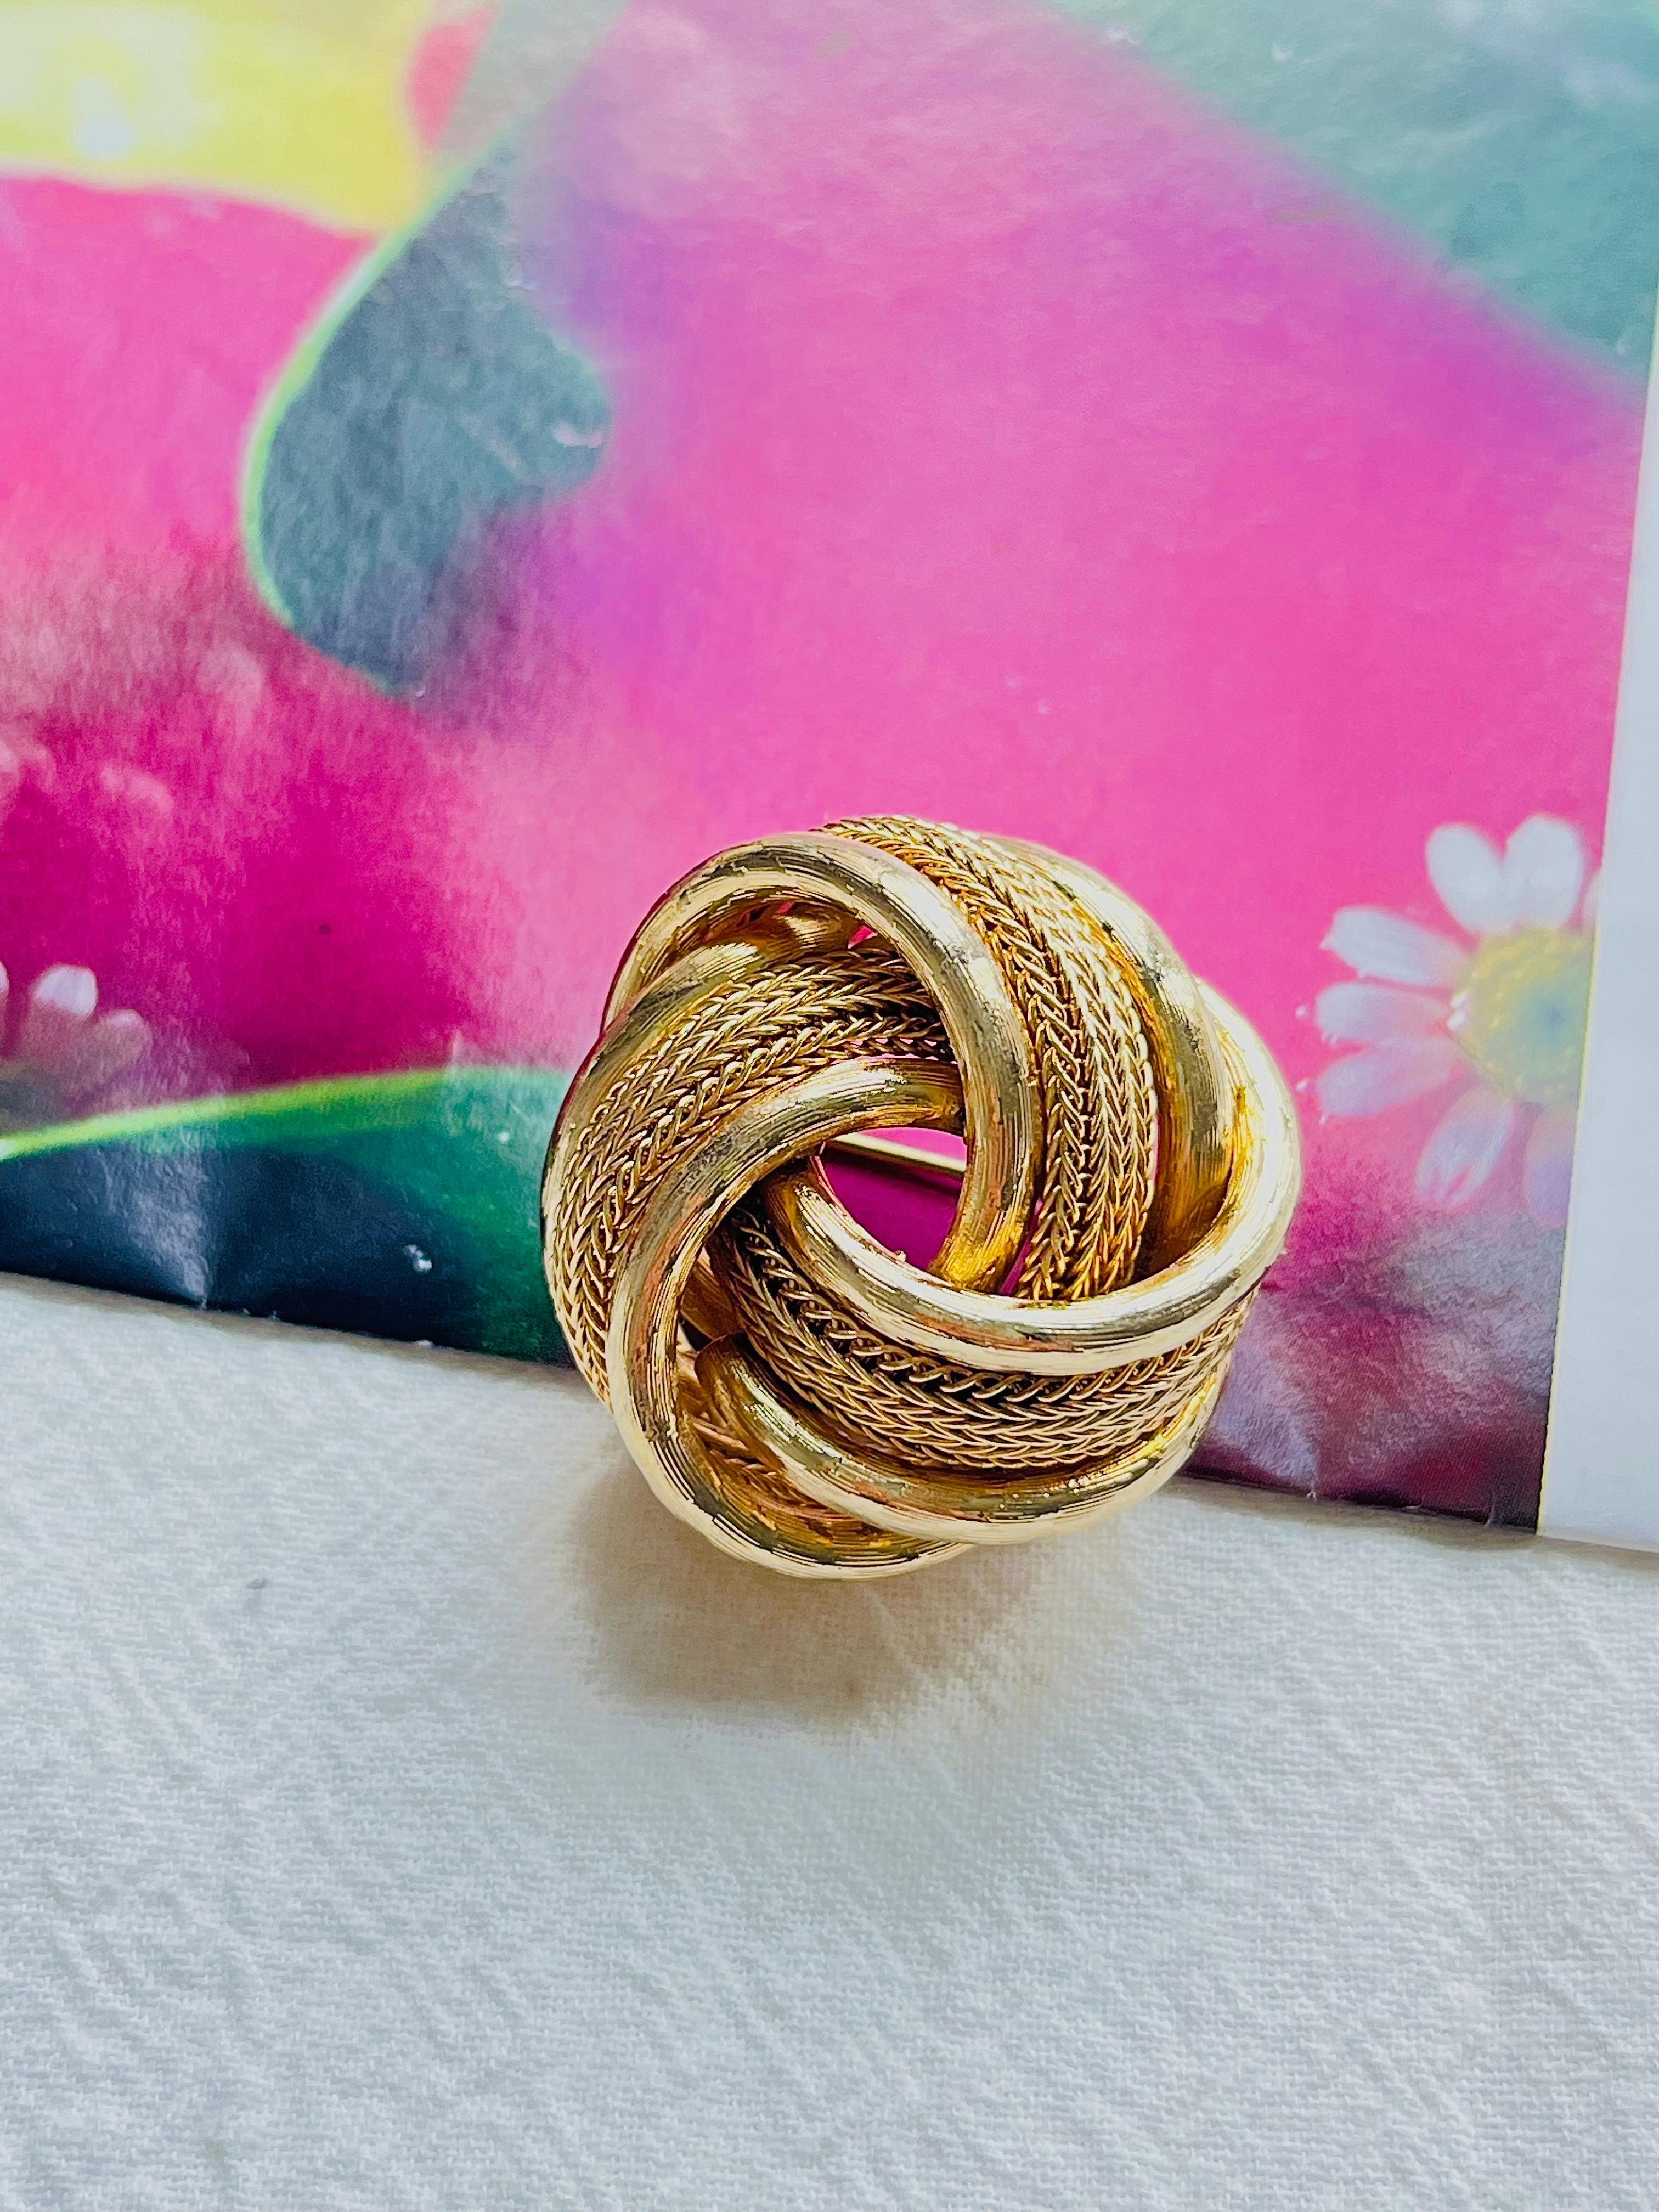 Christian Dior GROSSE 1963 Vintage Knot Rope Glow Mesh Swirl Twist Dome Round Chunky Brooch, Gold Tone

Very excellent condition. 100% Genuine.

A unique piece. This gold plated stylised brooch. Safety-catch pin closure, signed on the back.

Size: